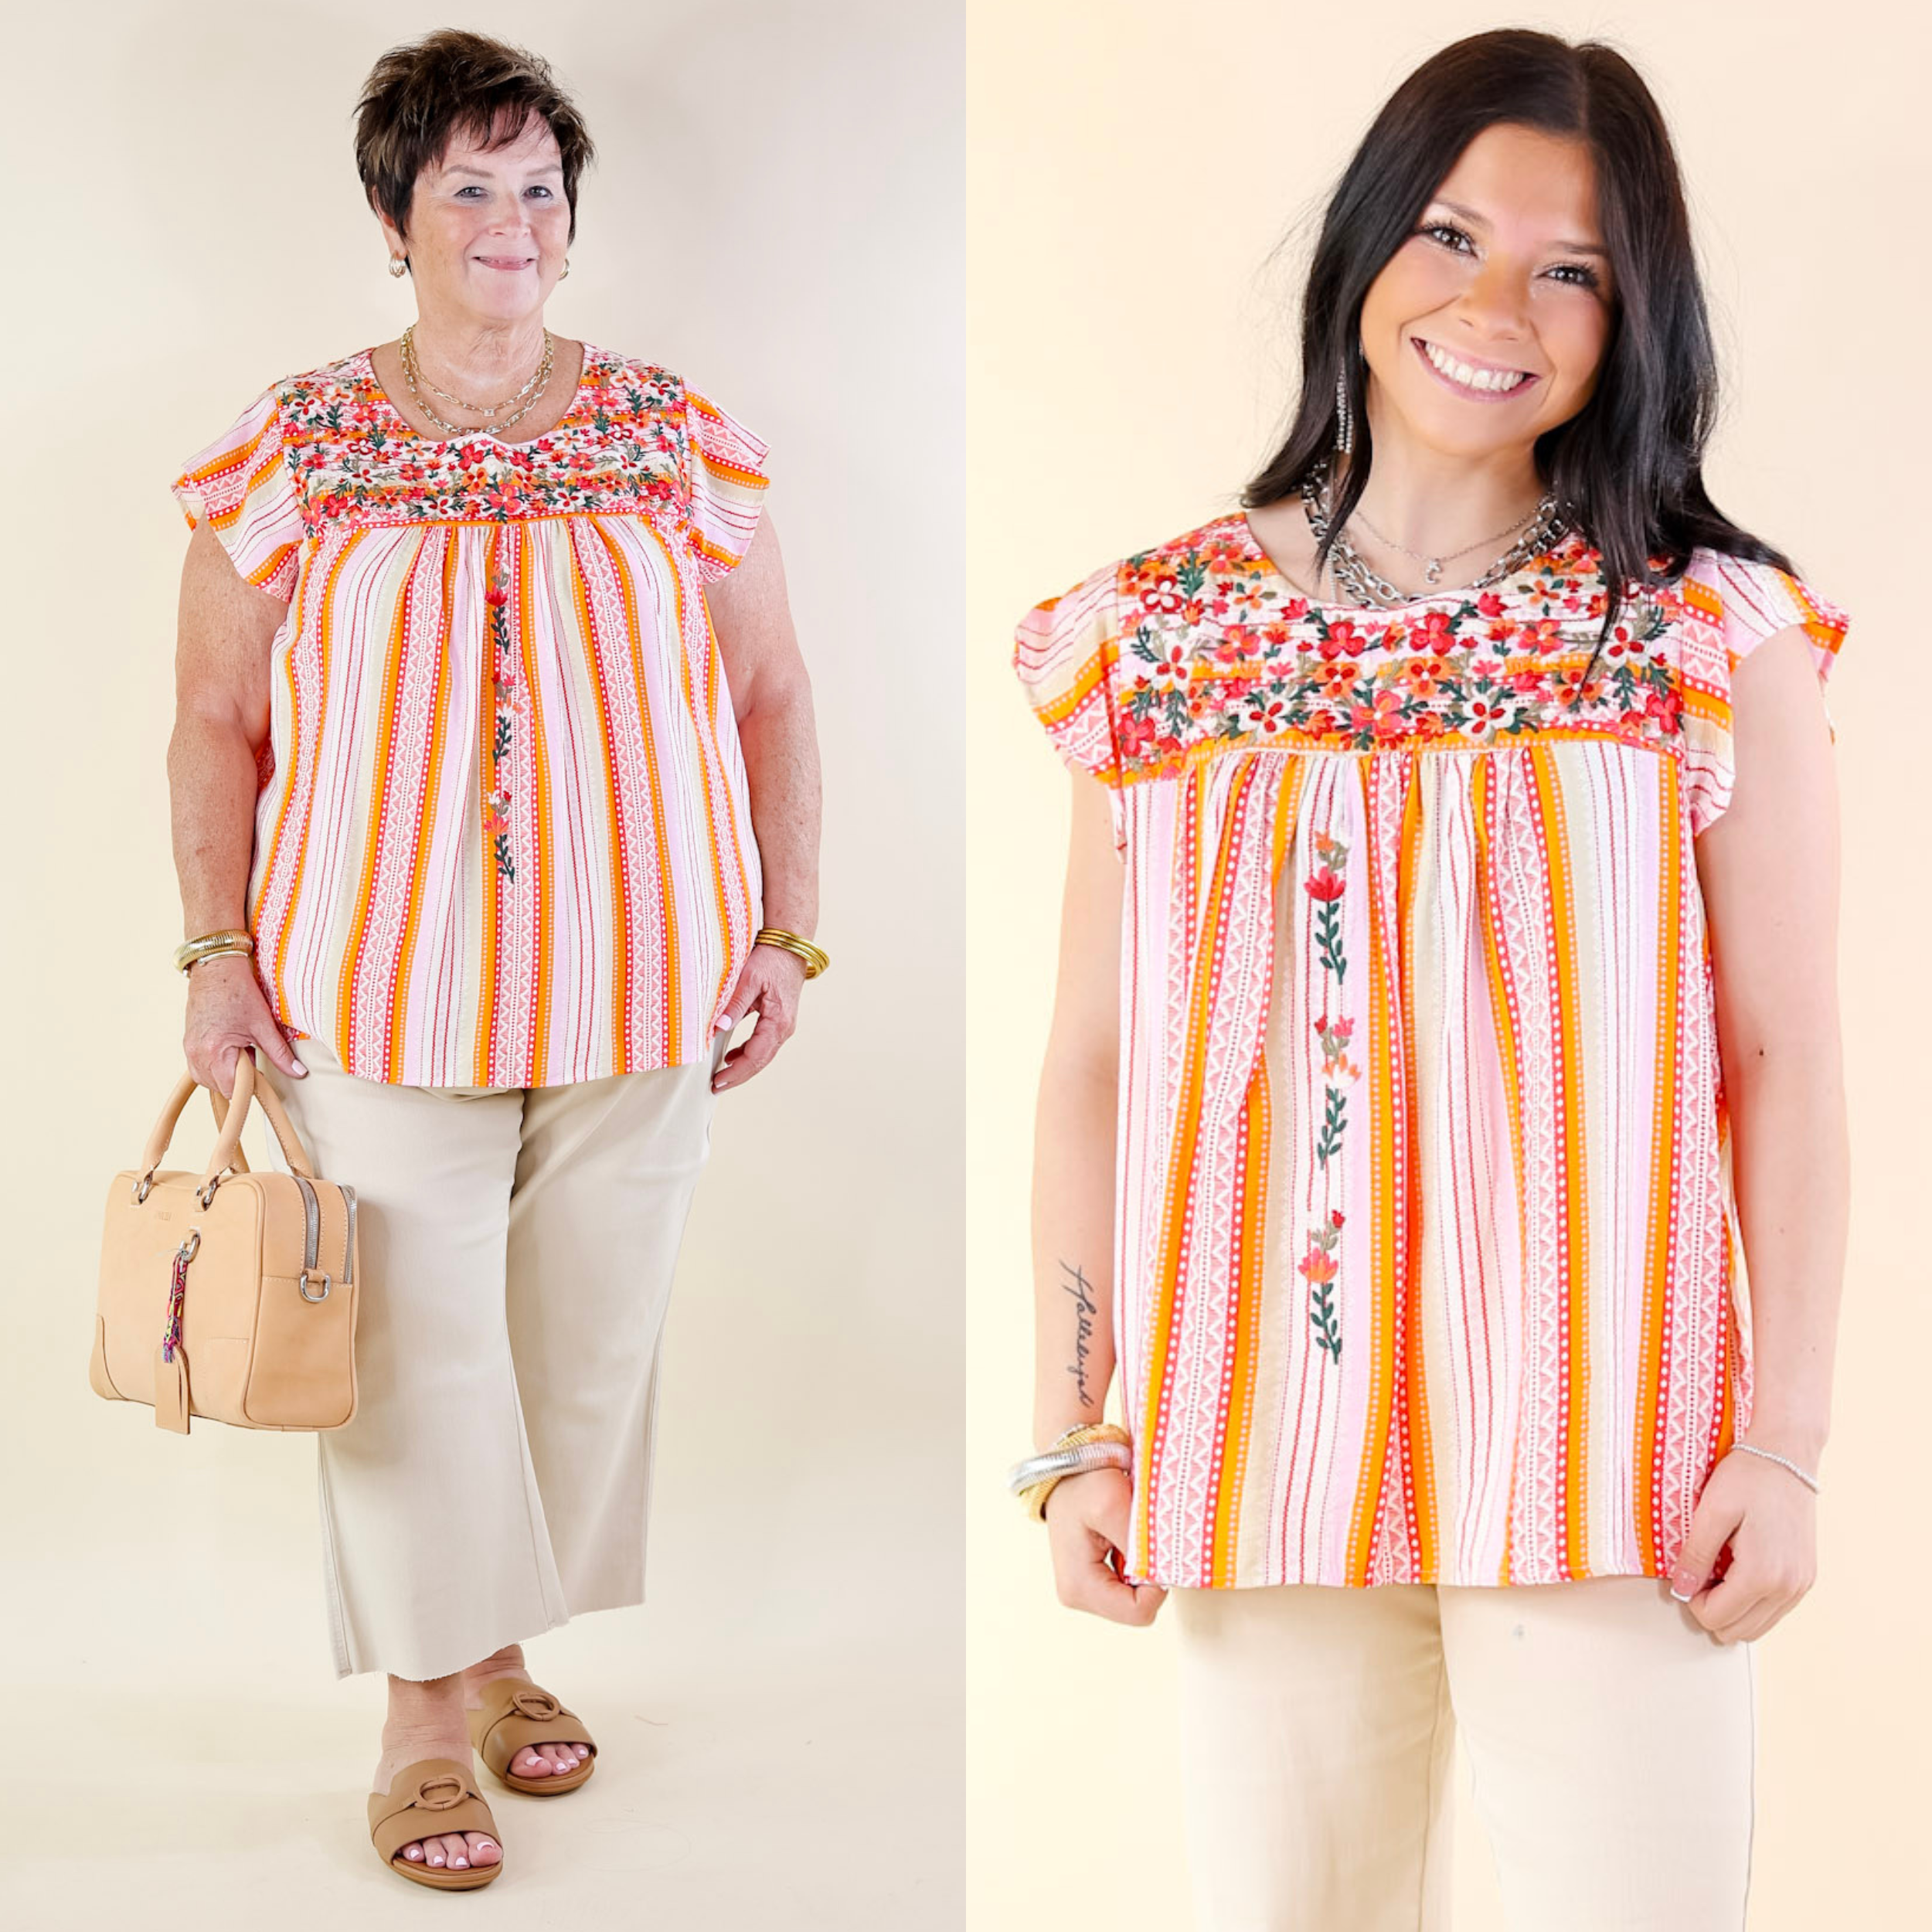 Lajitas Lady Striped Babydoll Top with Floral Embroidery in Orange and Pink